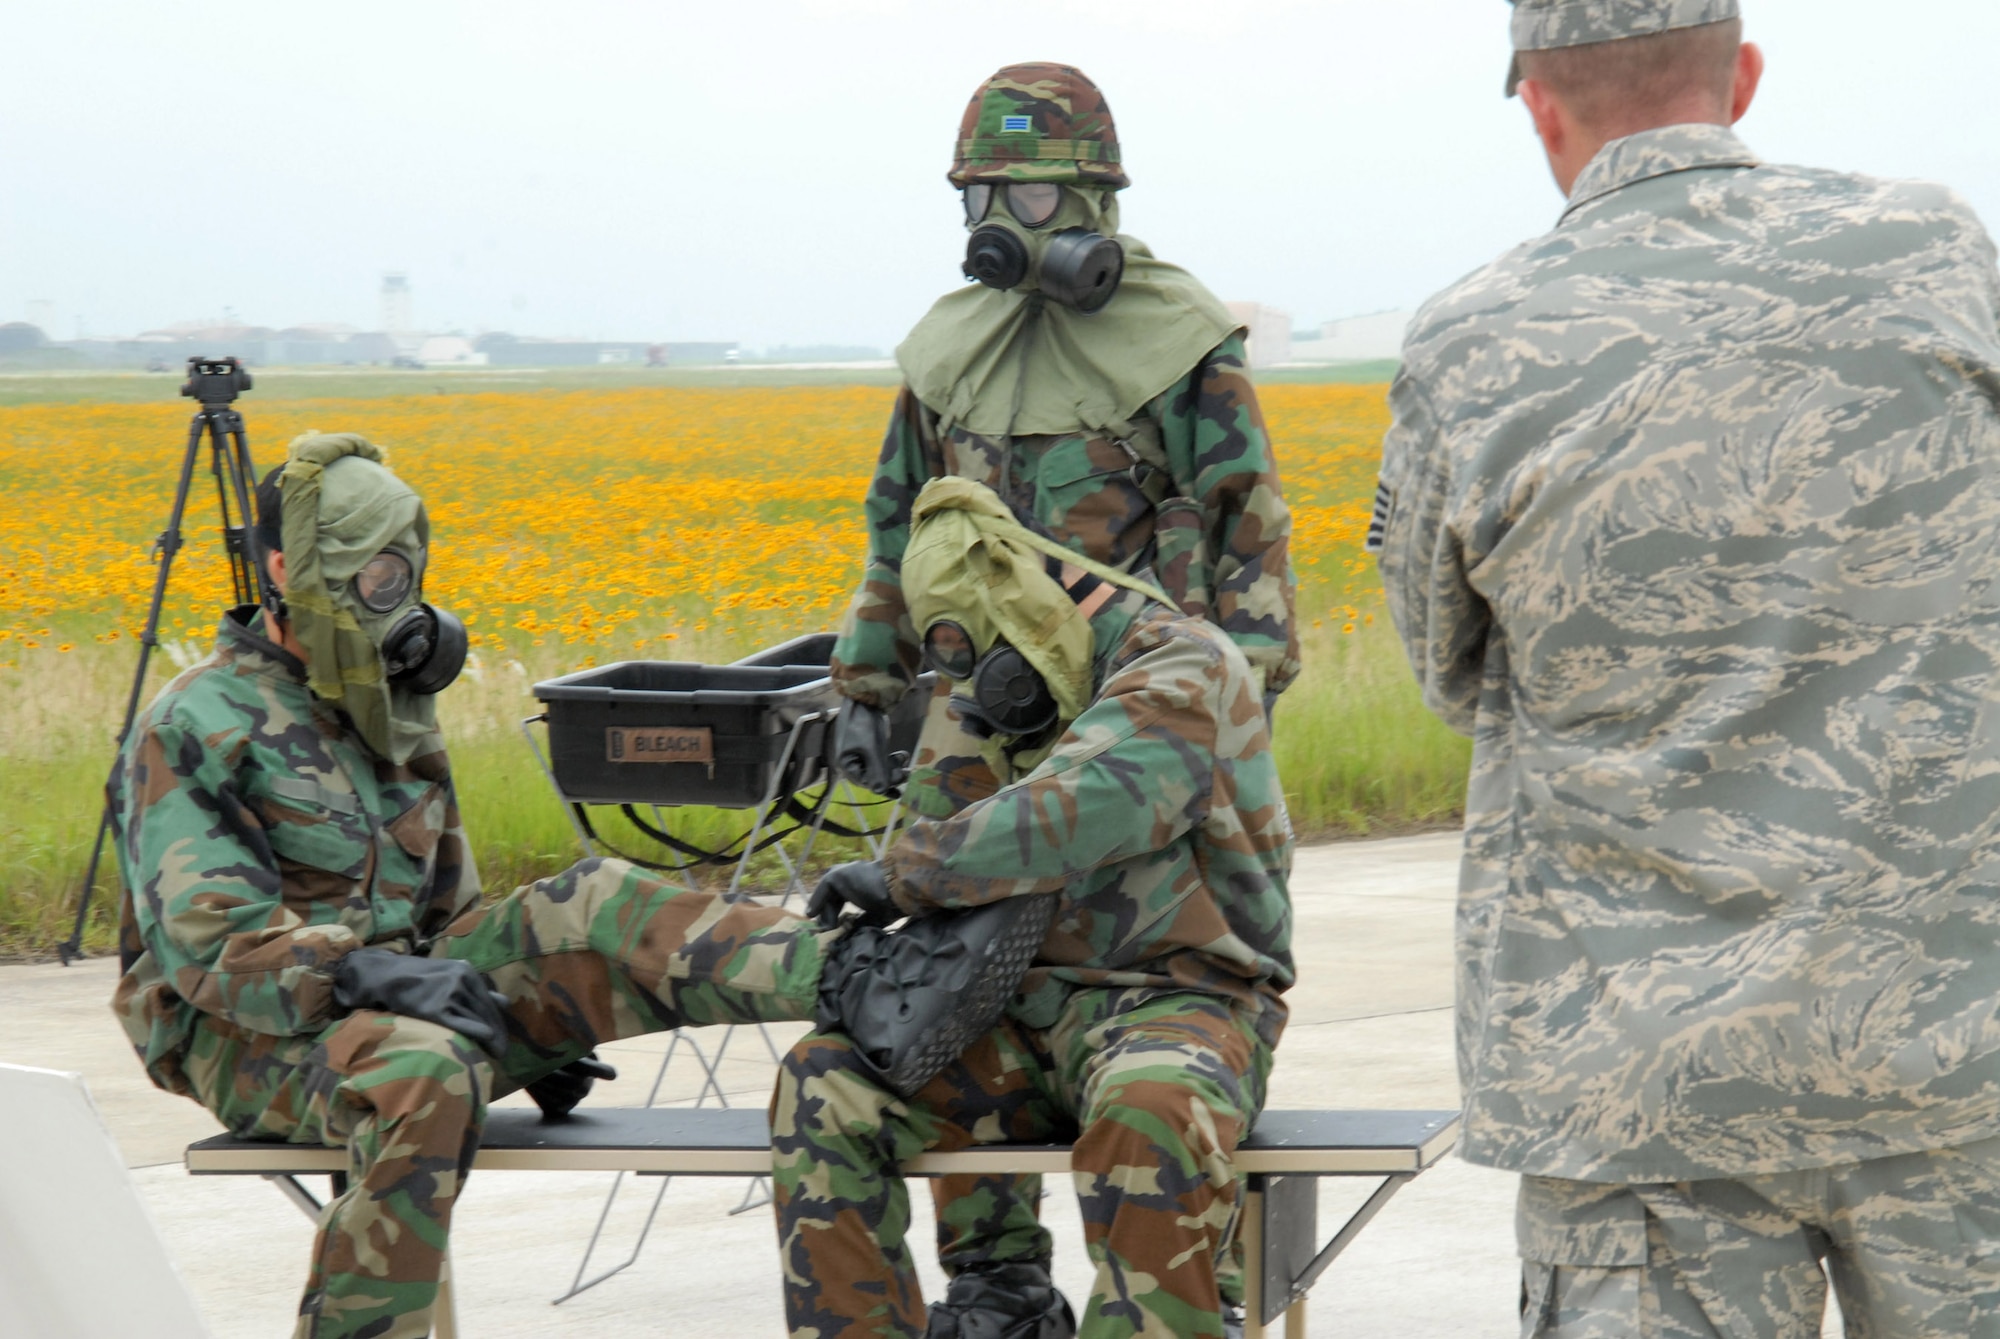 Tech. Sgt. Frank Roman observes South Korean army soldiers while they remove their chemical warfare gear June 24 at Kunsan Air Base, South Korea. South Korean army soldiers demonstrated the capabilities of their nuclear, biological and chemical detection technology during a two-day combined training session here June 23 and 24. Sergeant Roman is the NCO in charge of readiness and training from the 8th Civil Engineer Squadron. (U.S. Air Force photo/Staff Sgt Araceli Alarcon)
